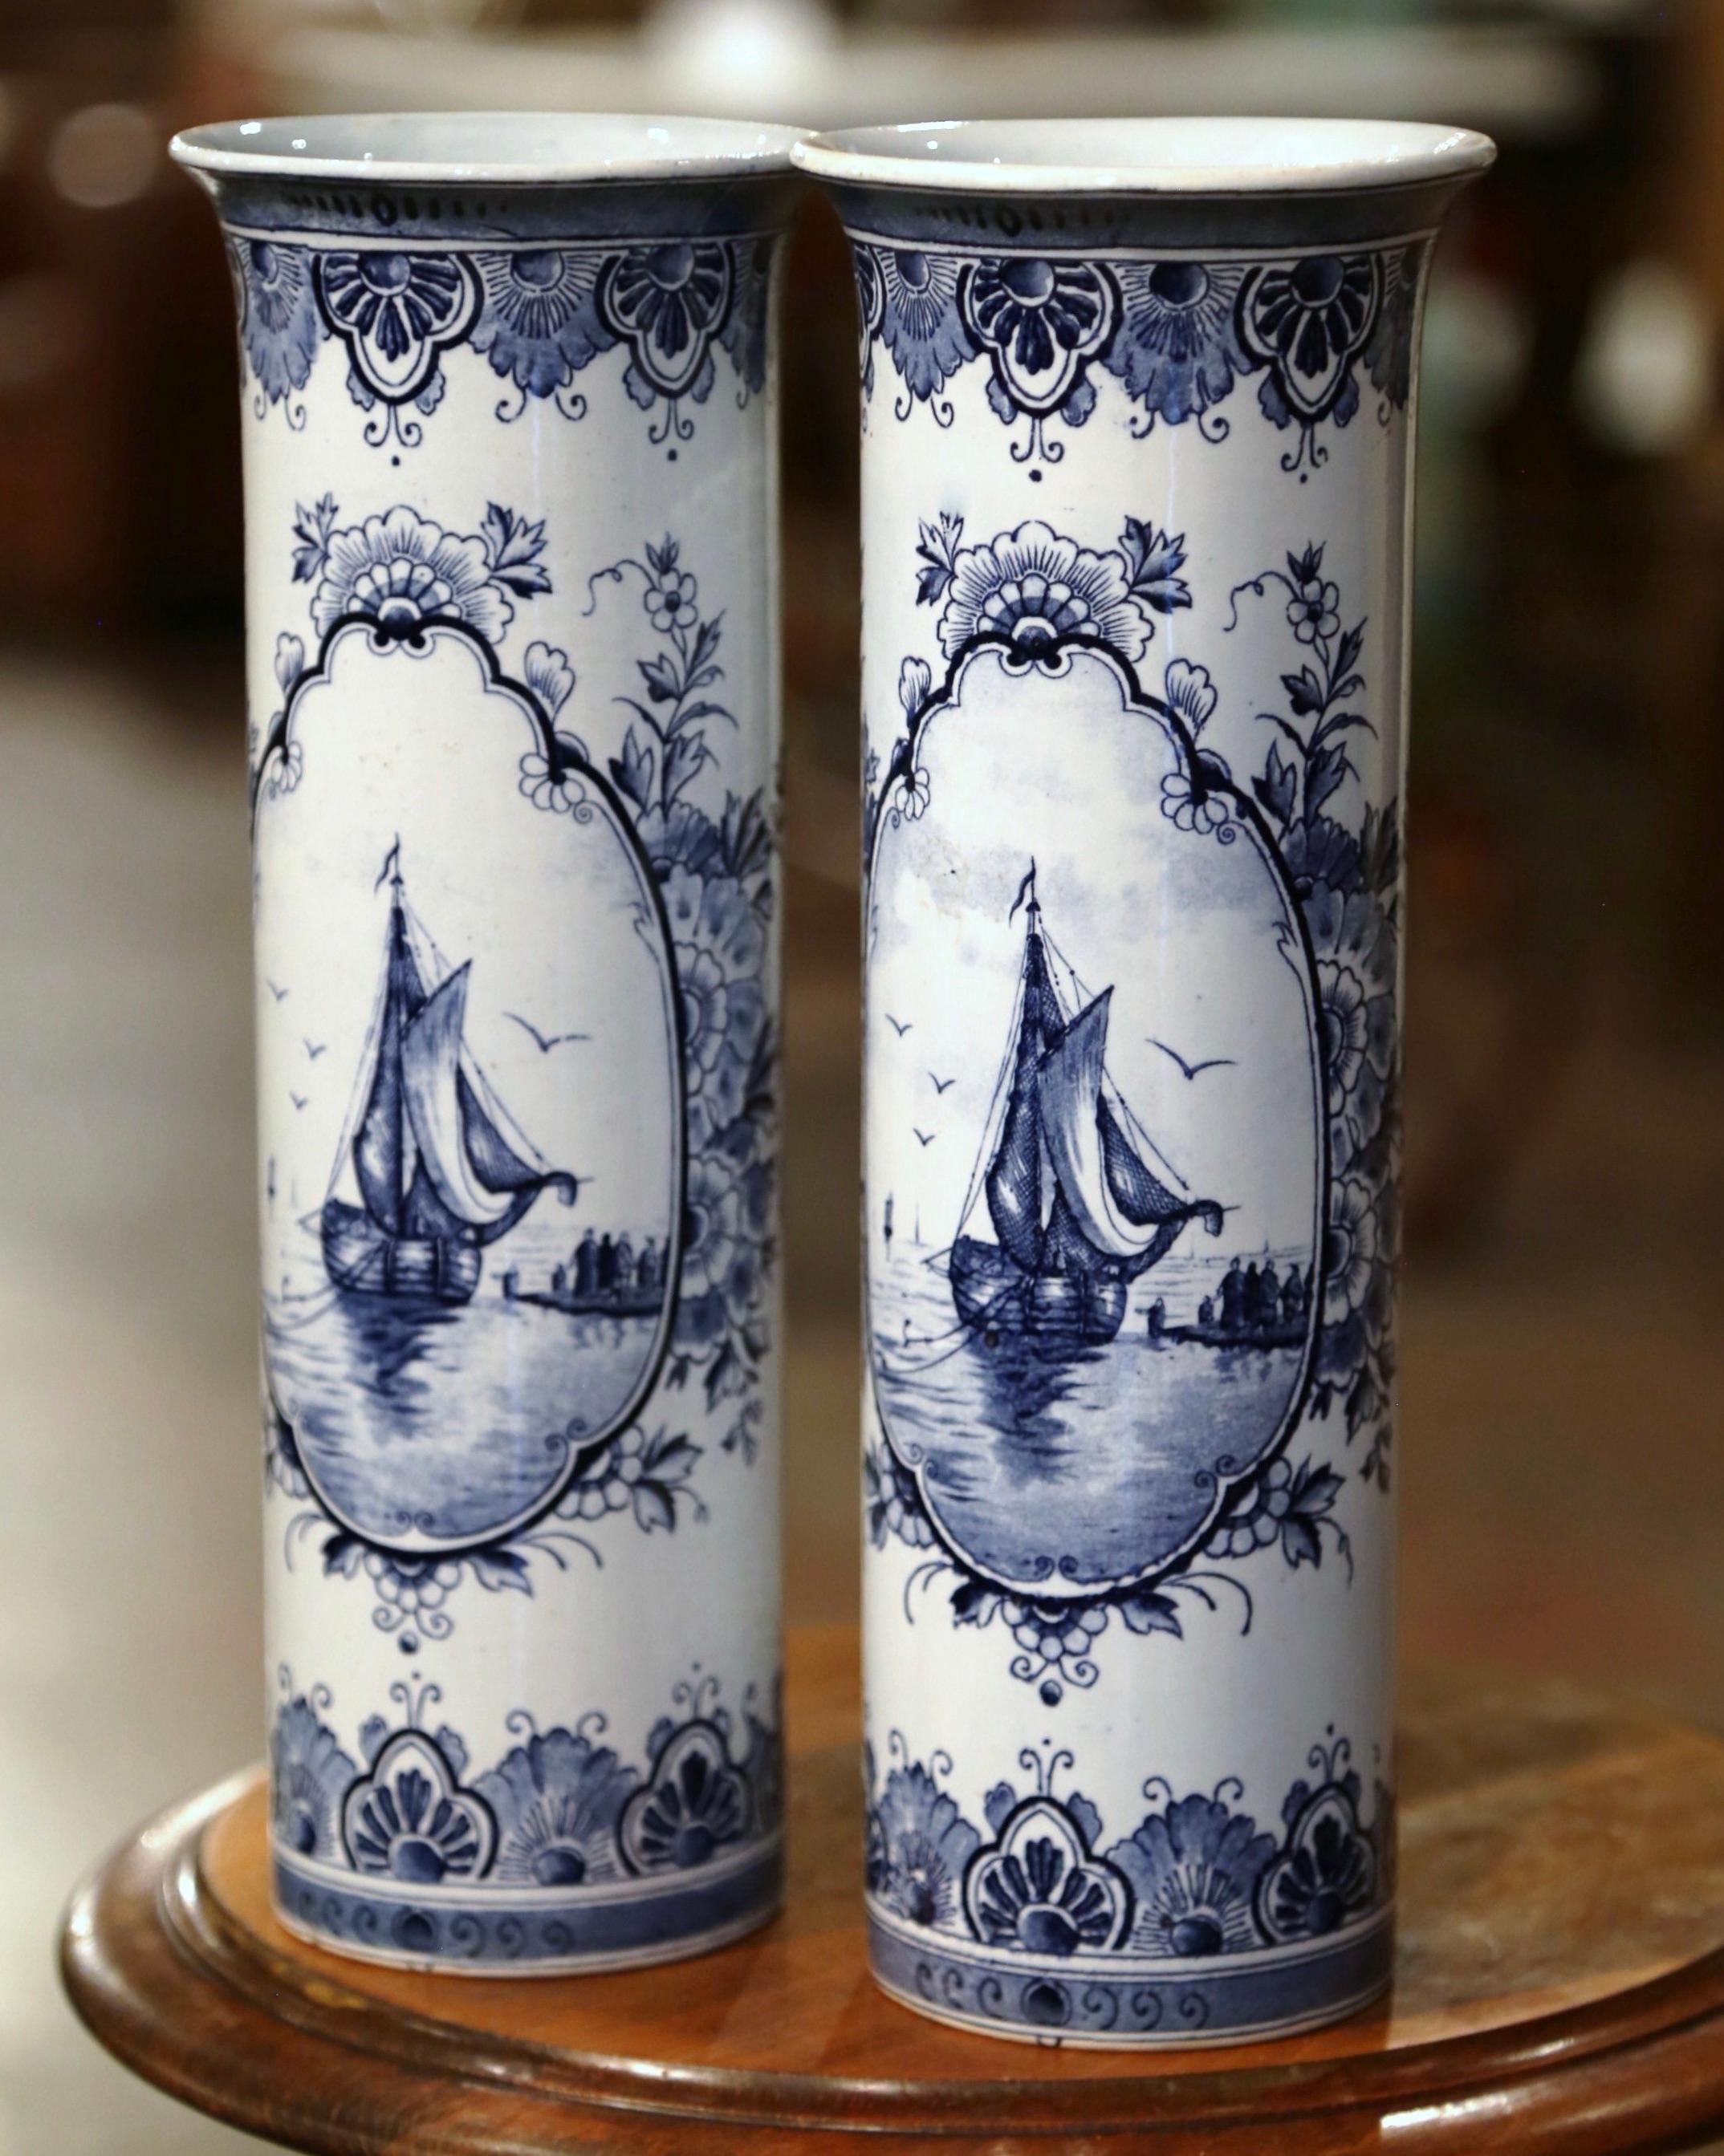 Decorate a shelf or console table with this elegant pair of antique vases with sailboat motifs. Crafted in Holland circa 1890, the round vases have a shell shape form with a wide rim at the top. Each vessel is hand painted in the blue and white